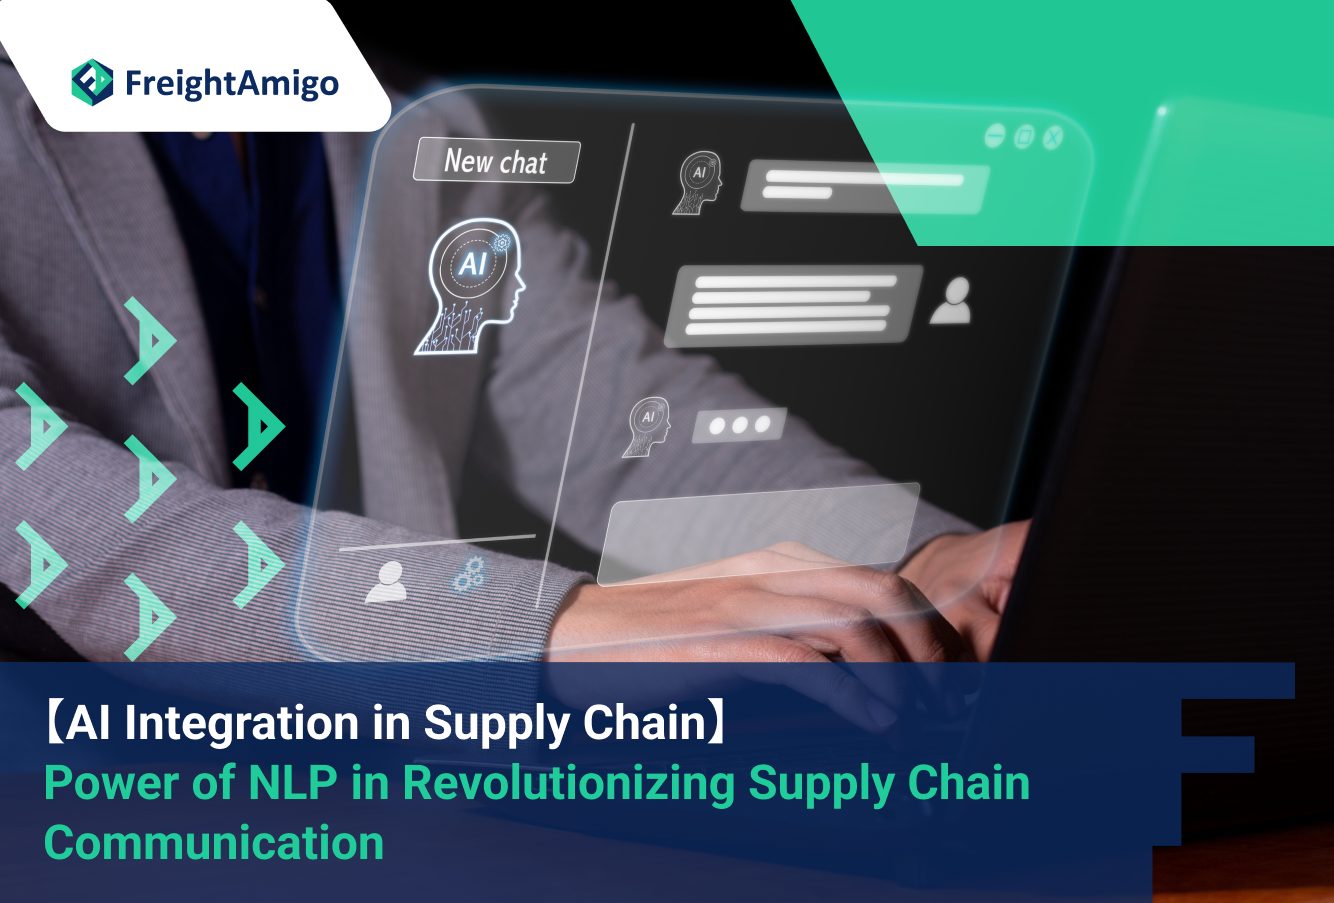 The Power of Natural Language Processing in Revolutionizing Supply Chain Communication